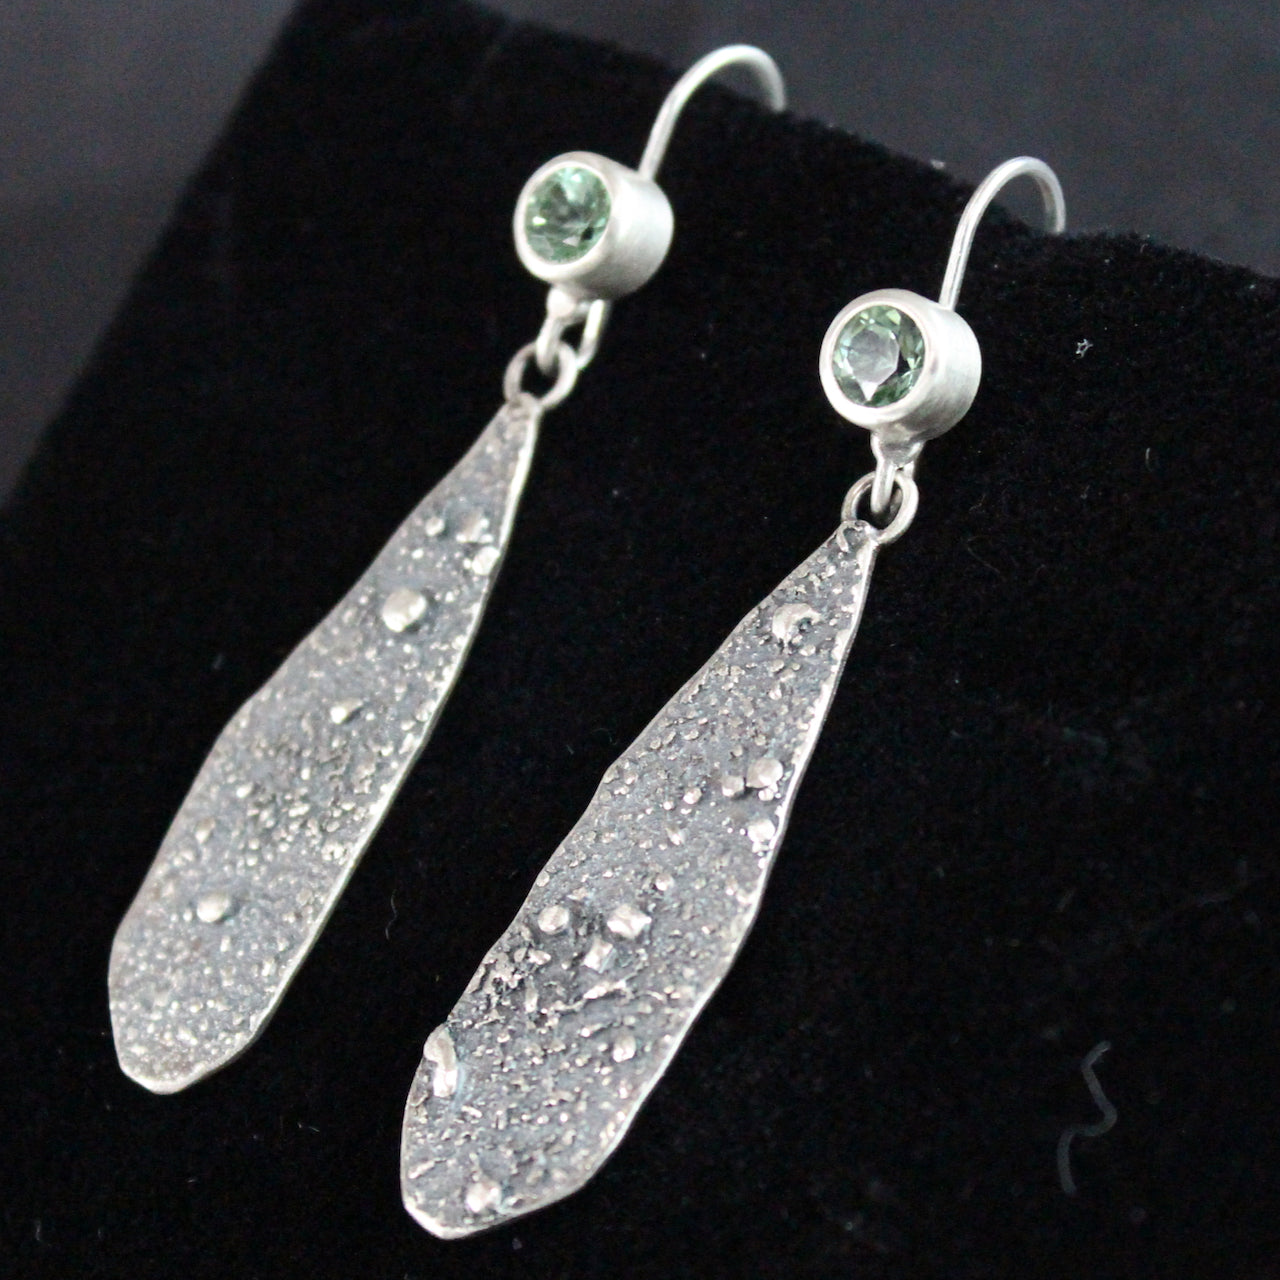 Mint green tourmaline drop earrings in textured sterling silver close up